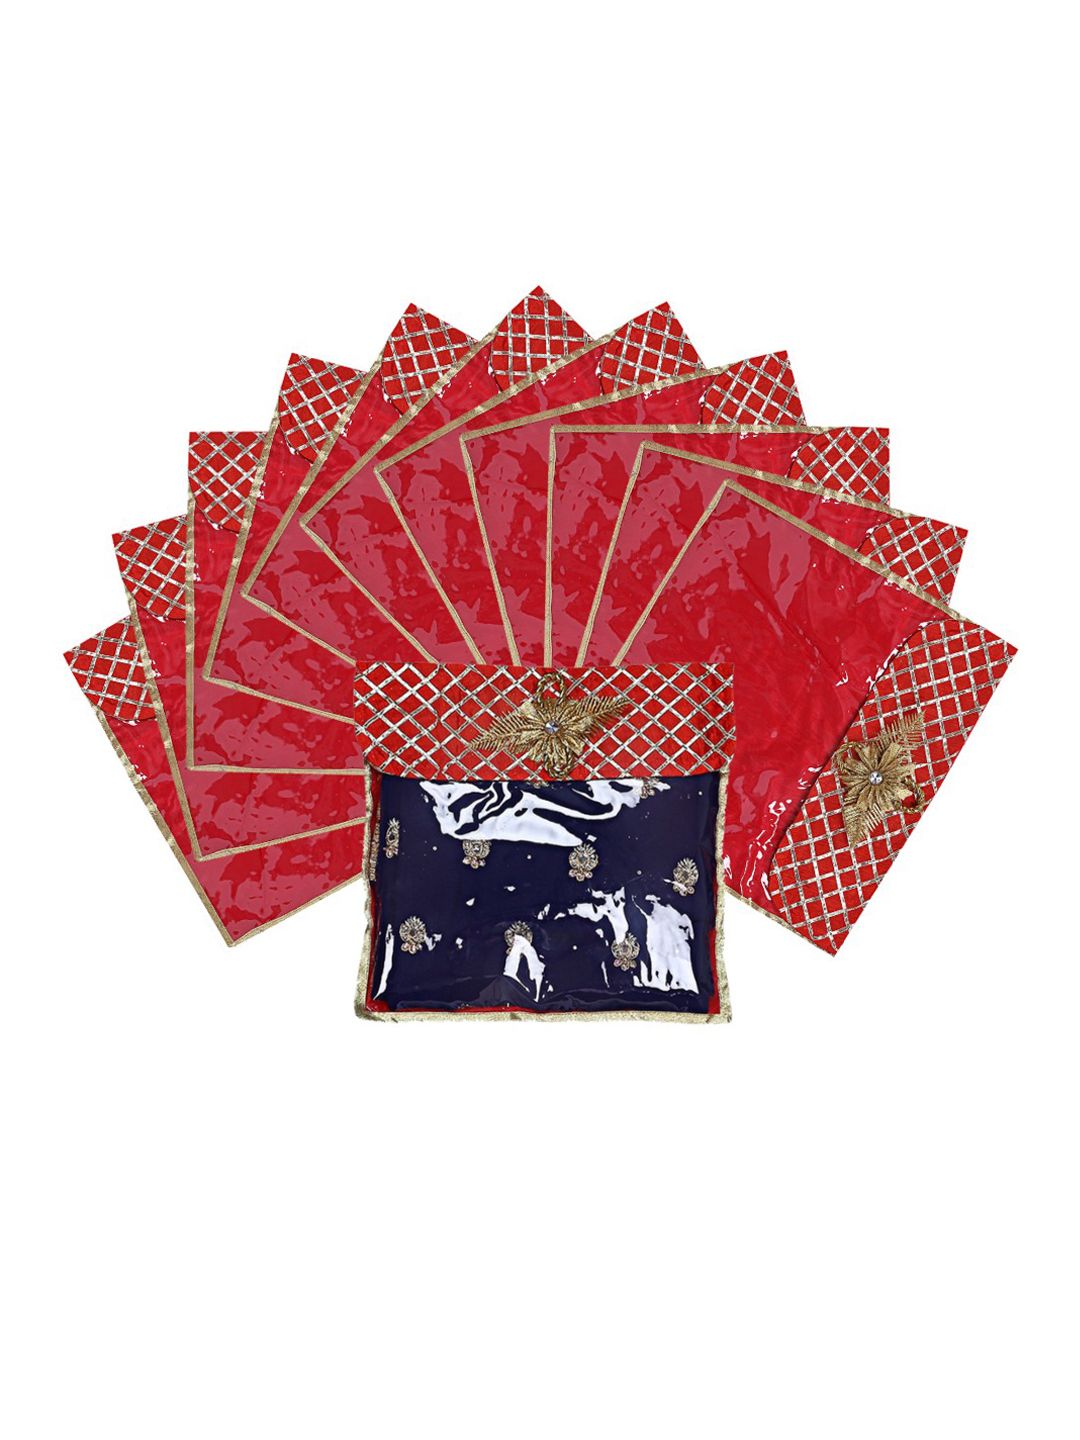 Kuber Industries Set Of 12 Red & Gold-Coloured Embellished Saree Organizers Price in India